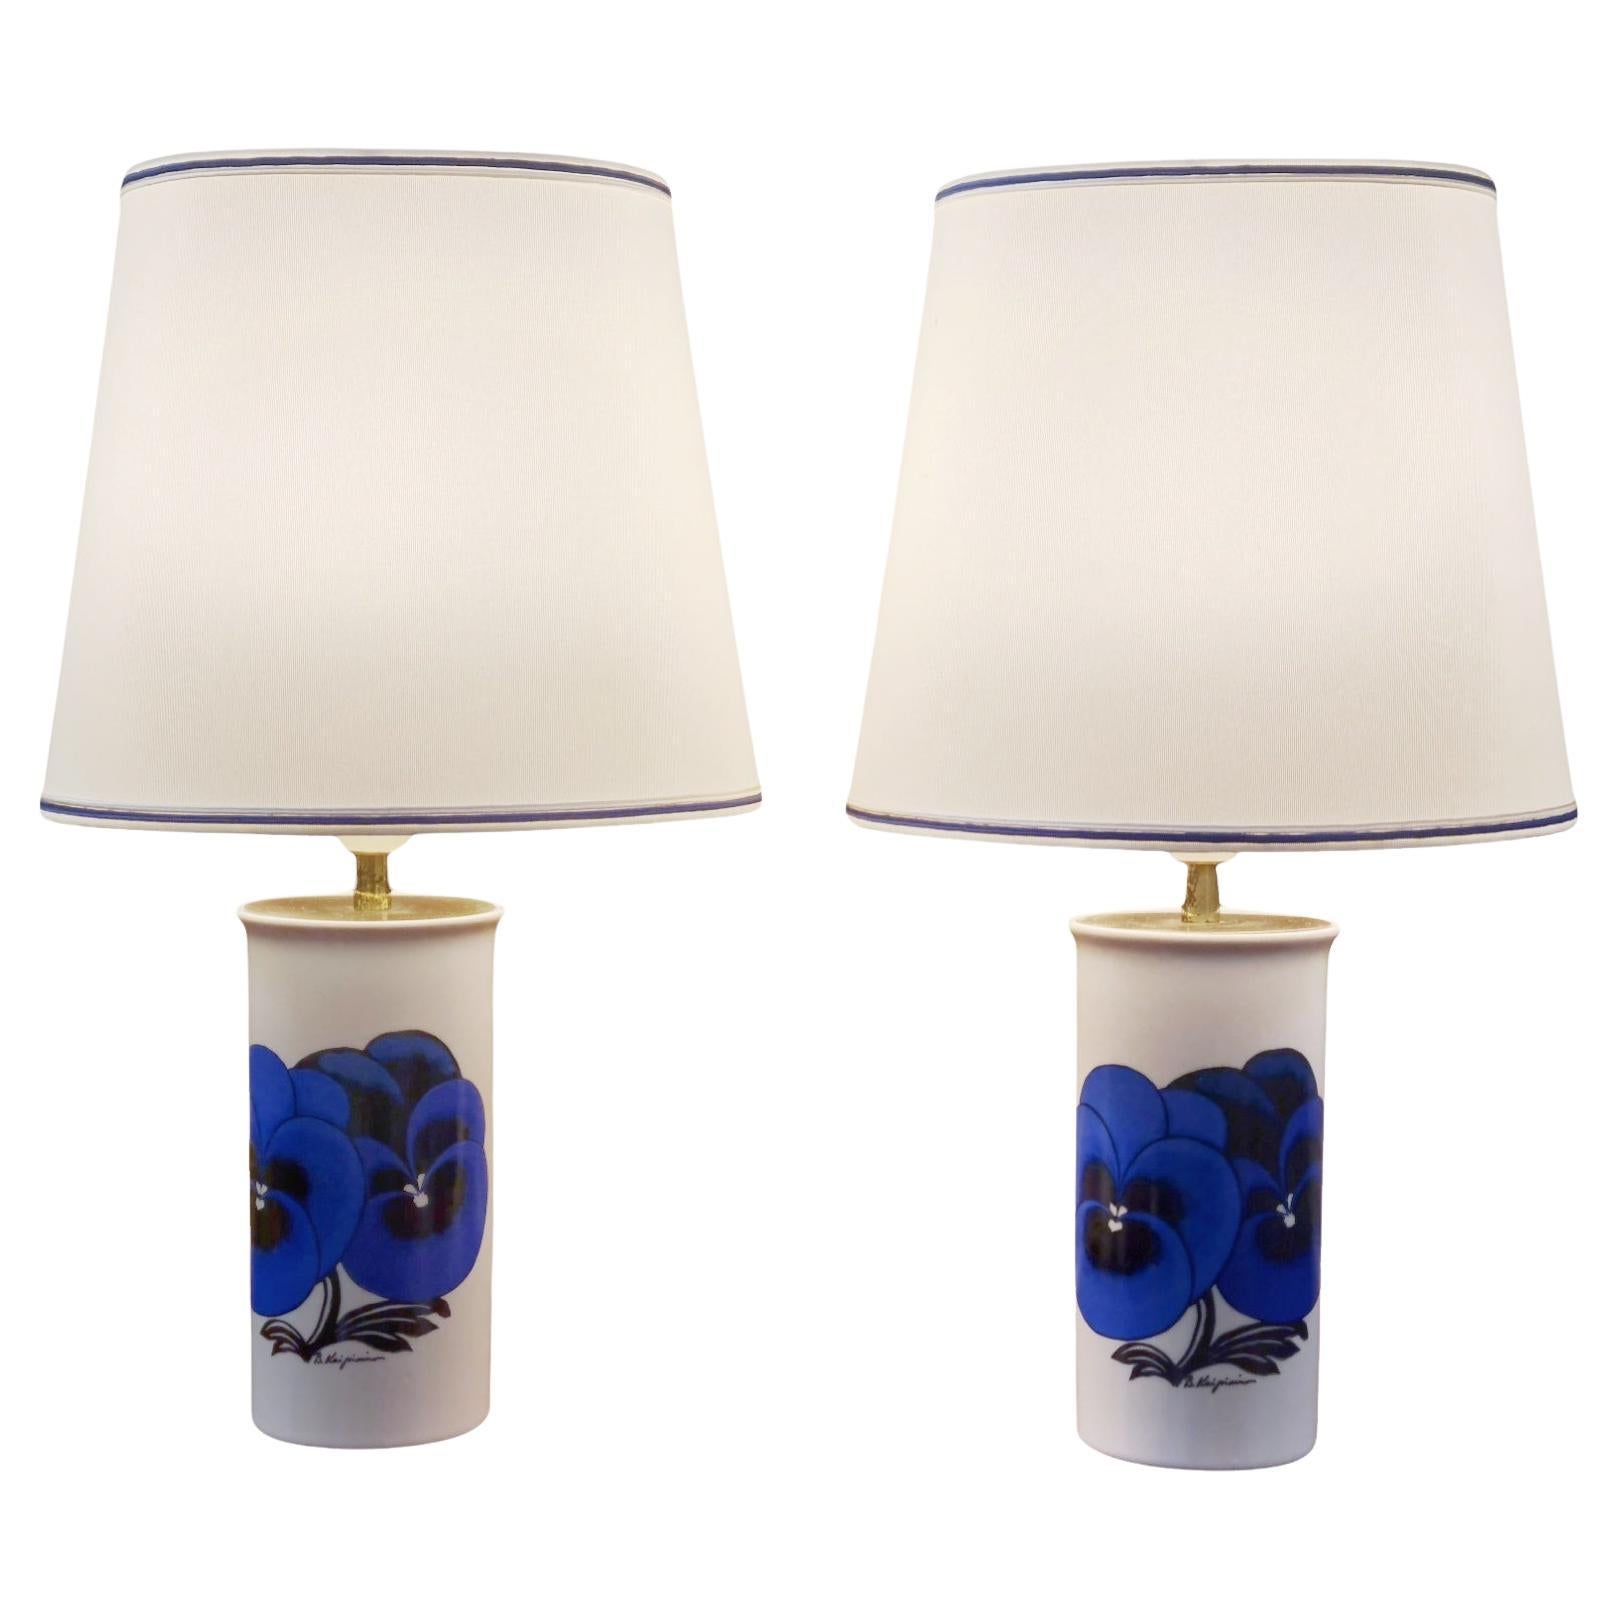 A Pair of Birger Kaipiainen Table Lamps, Arabia 1980s For Sale